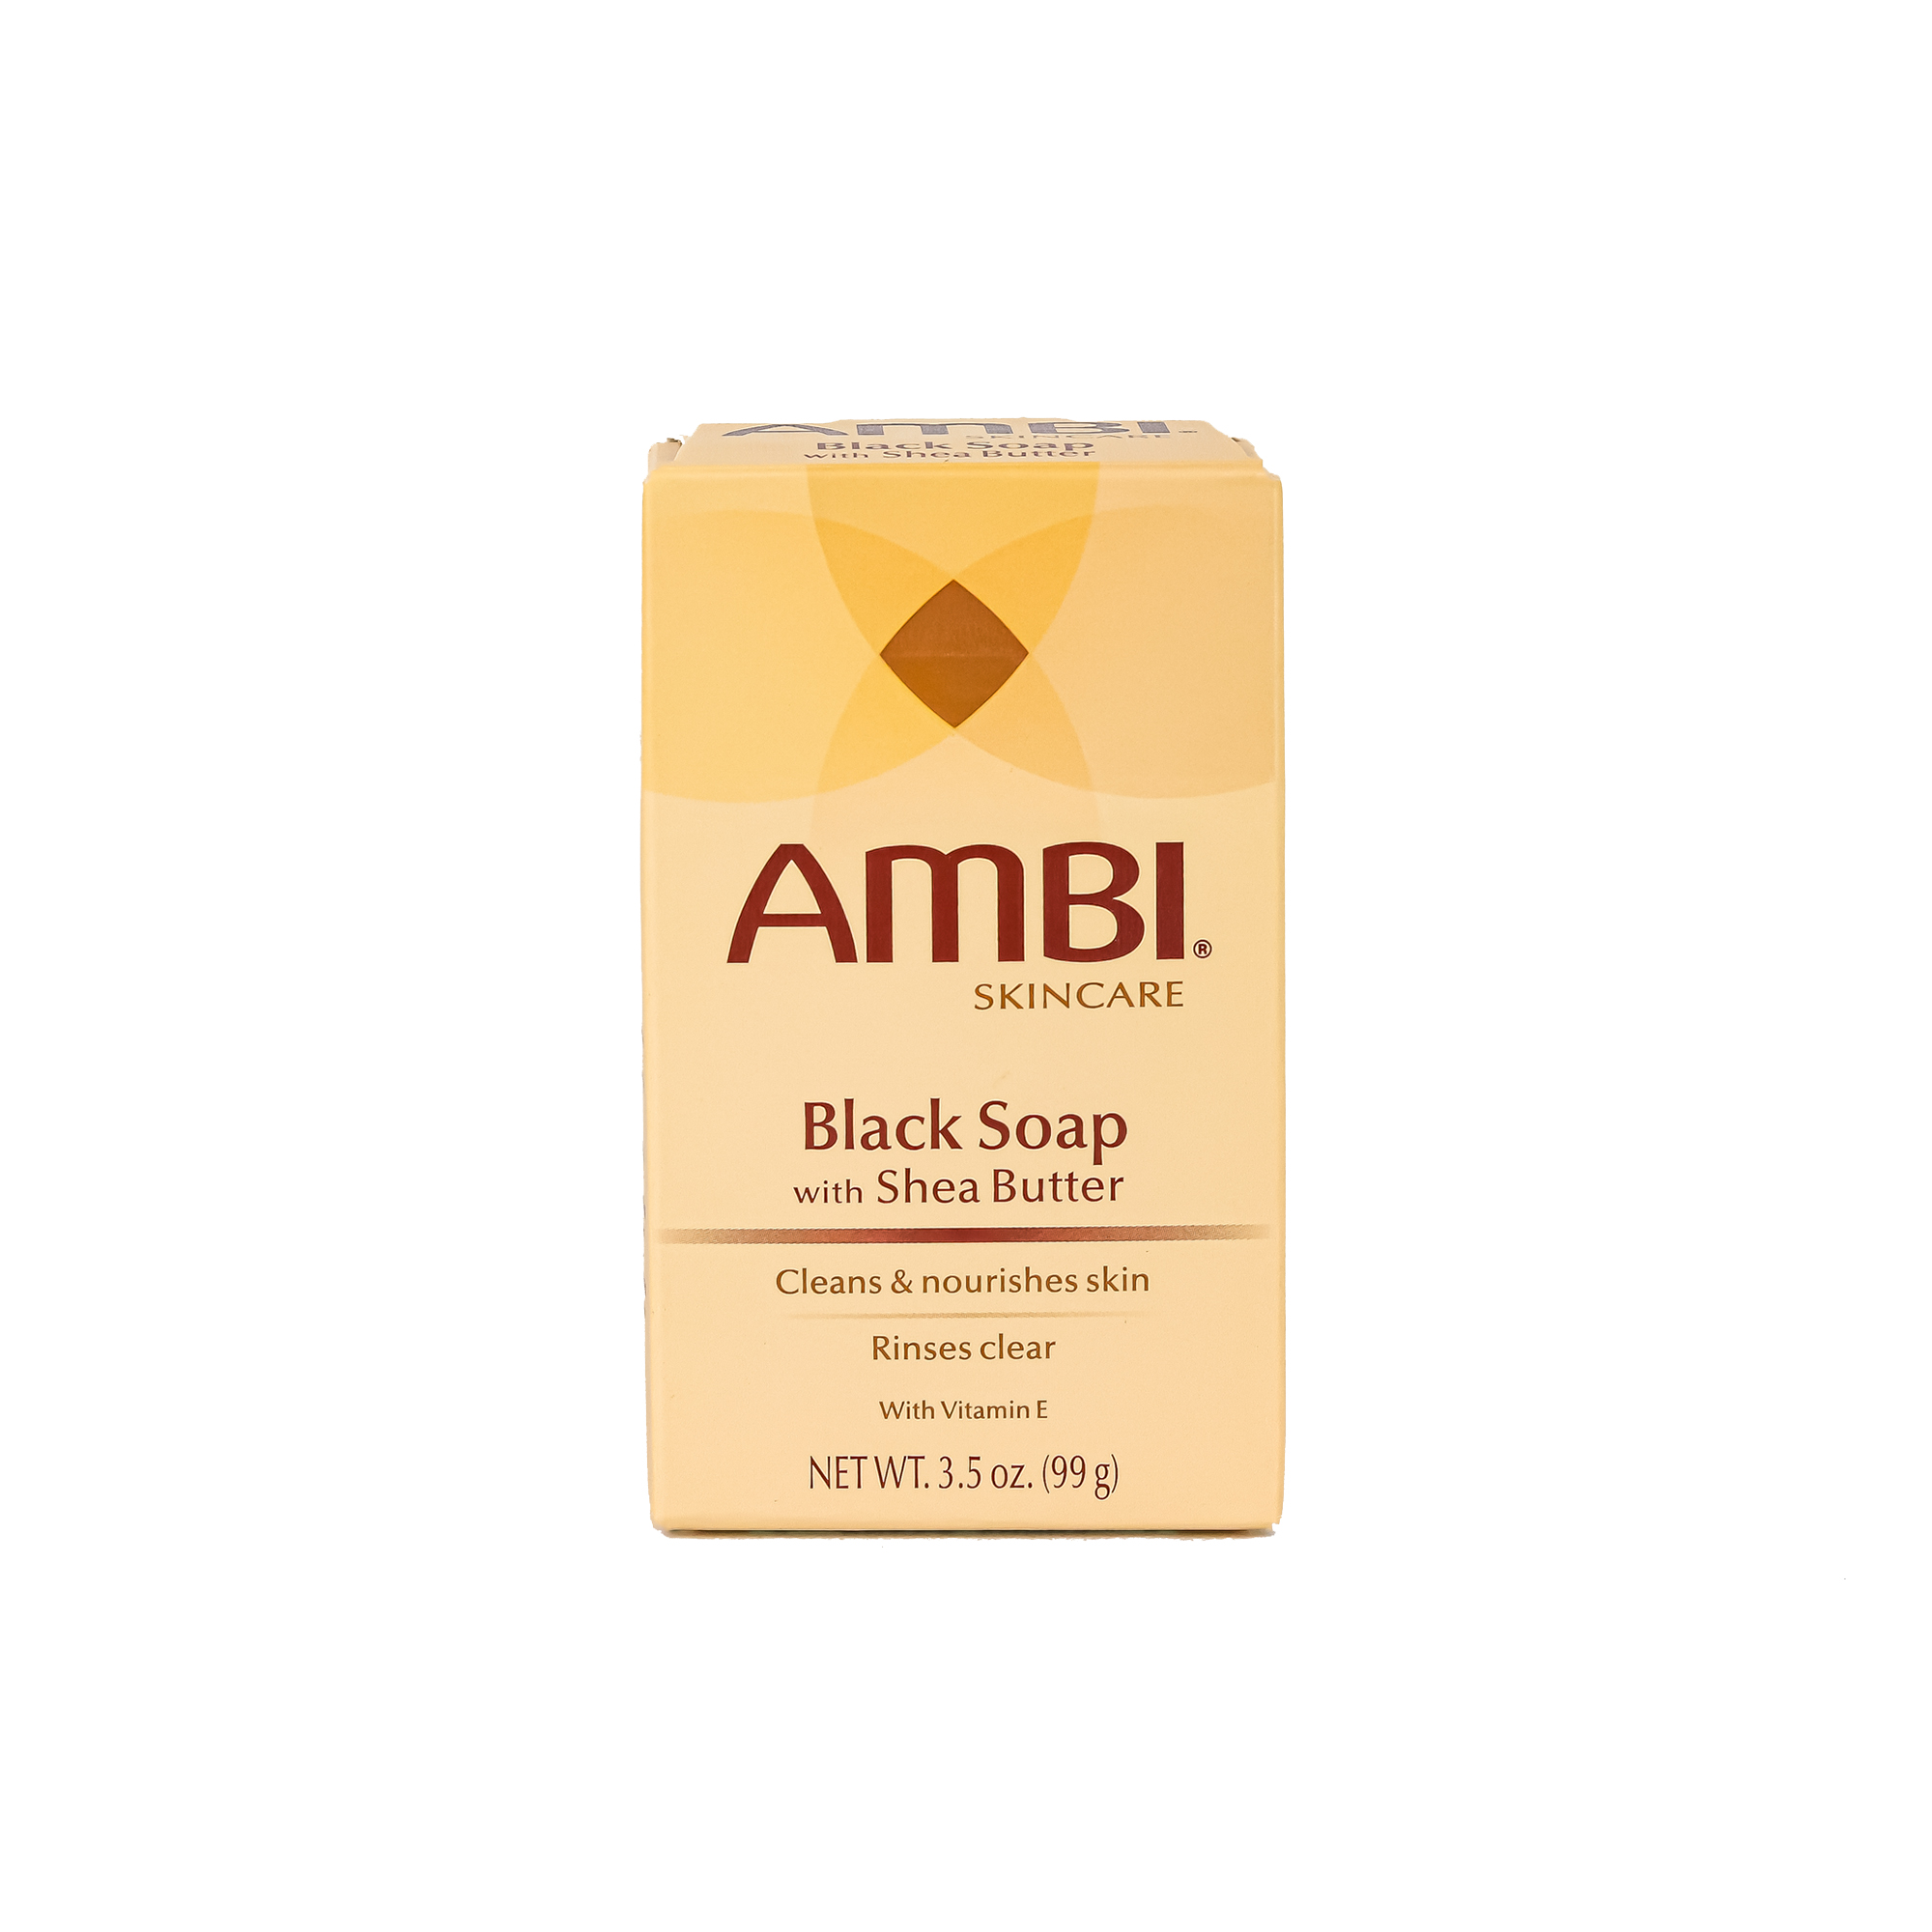 Ambi Black Soap Bar with Shea Butter